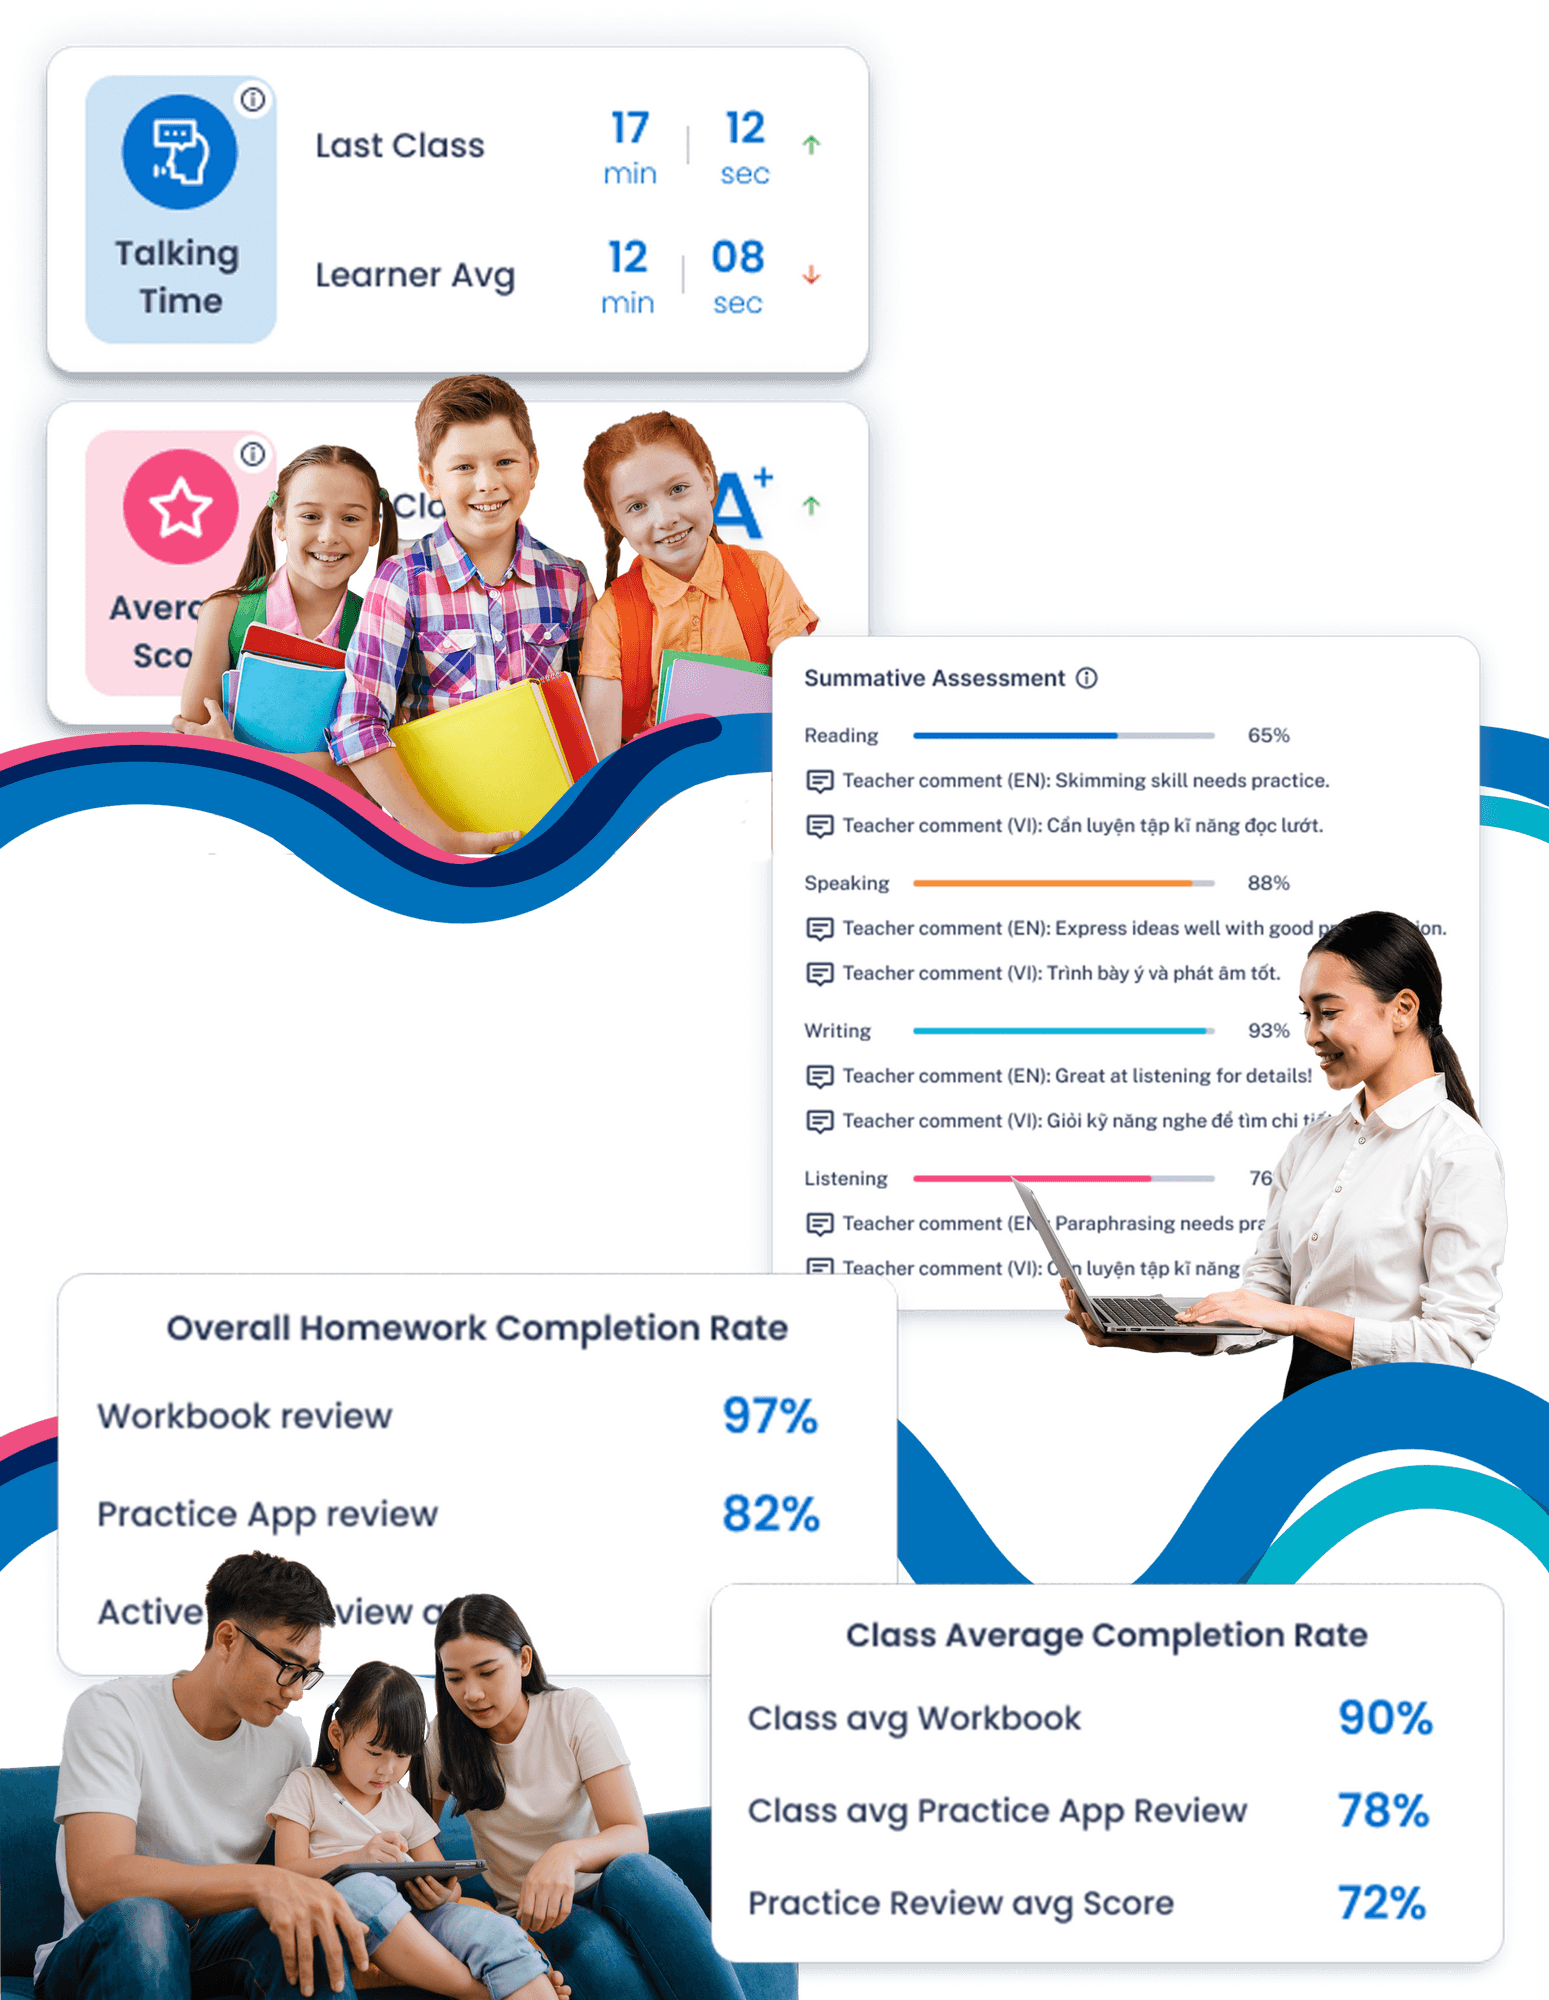 Montage: Learner analytics with student talk time and average score, teacher reviewing skills feedback from summative assessments, and a family monitoring their daughter's homework and class completion rates.